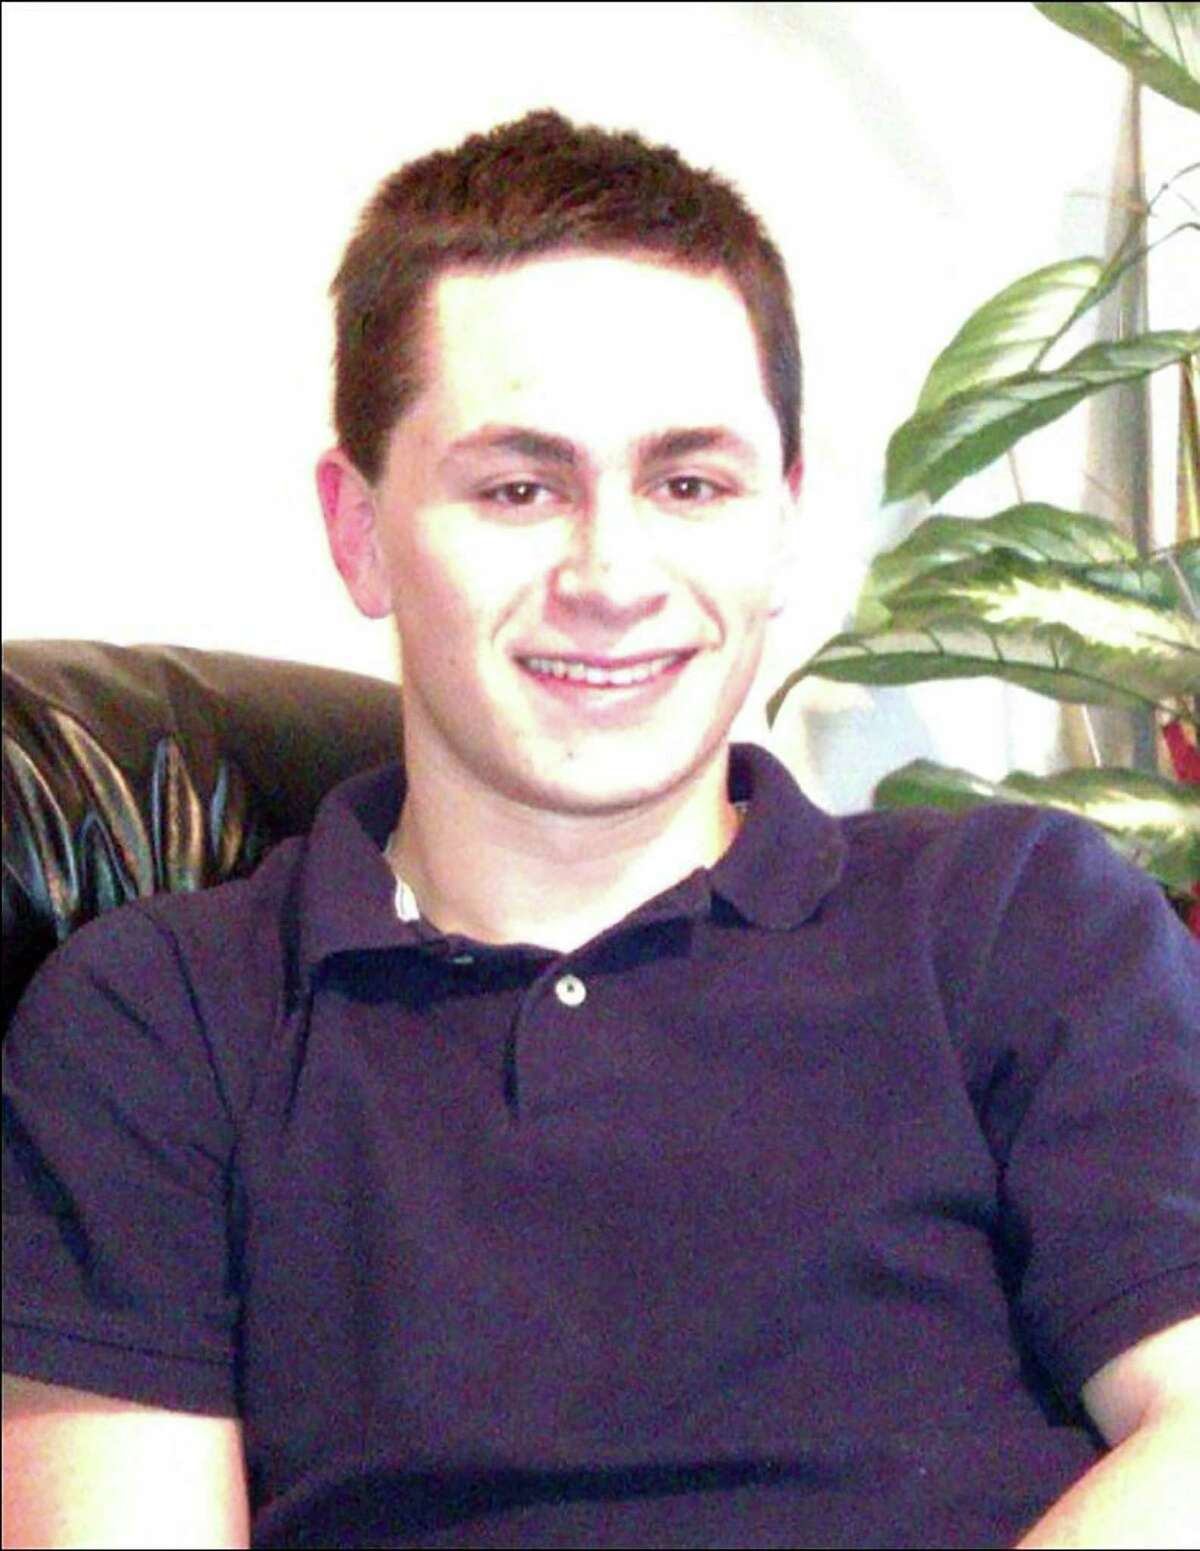 Because suspected Austin bomber Mark Anthony Conditt was home schooled, his education has undeservedly come under criticism.